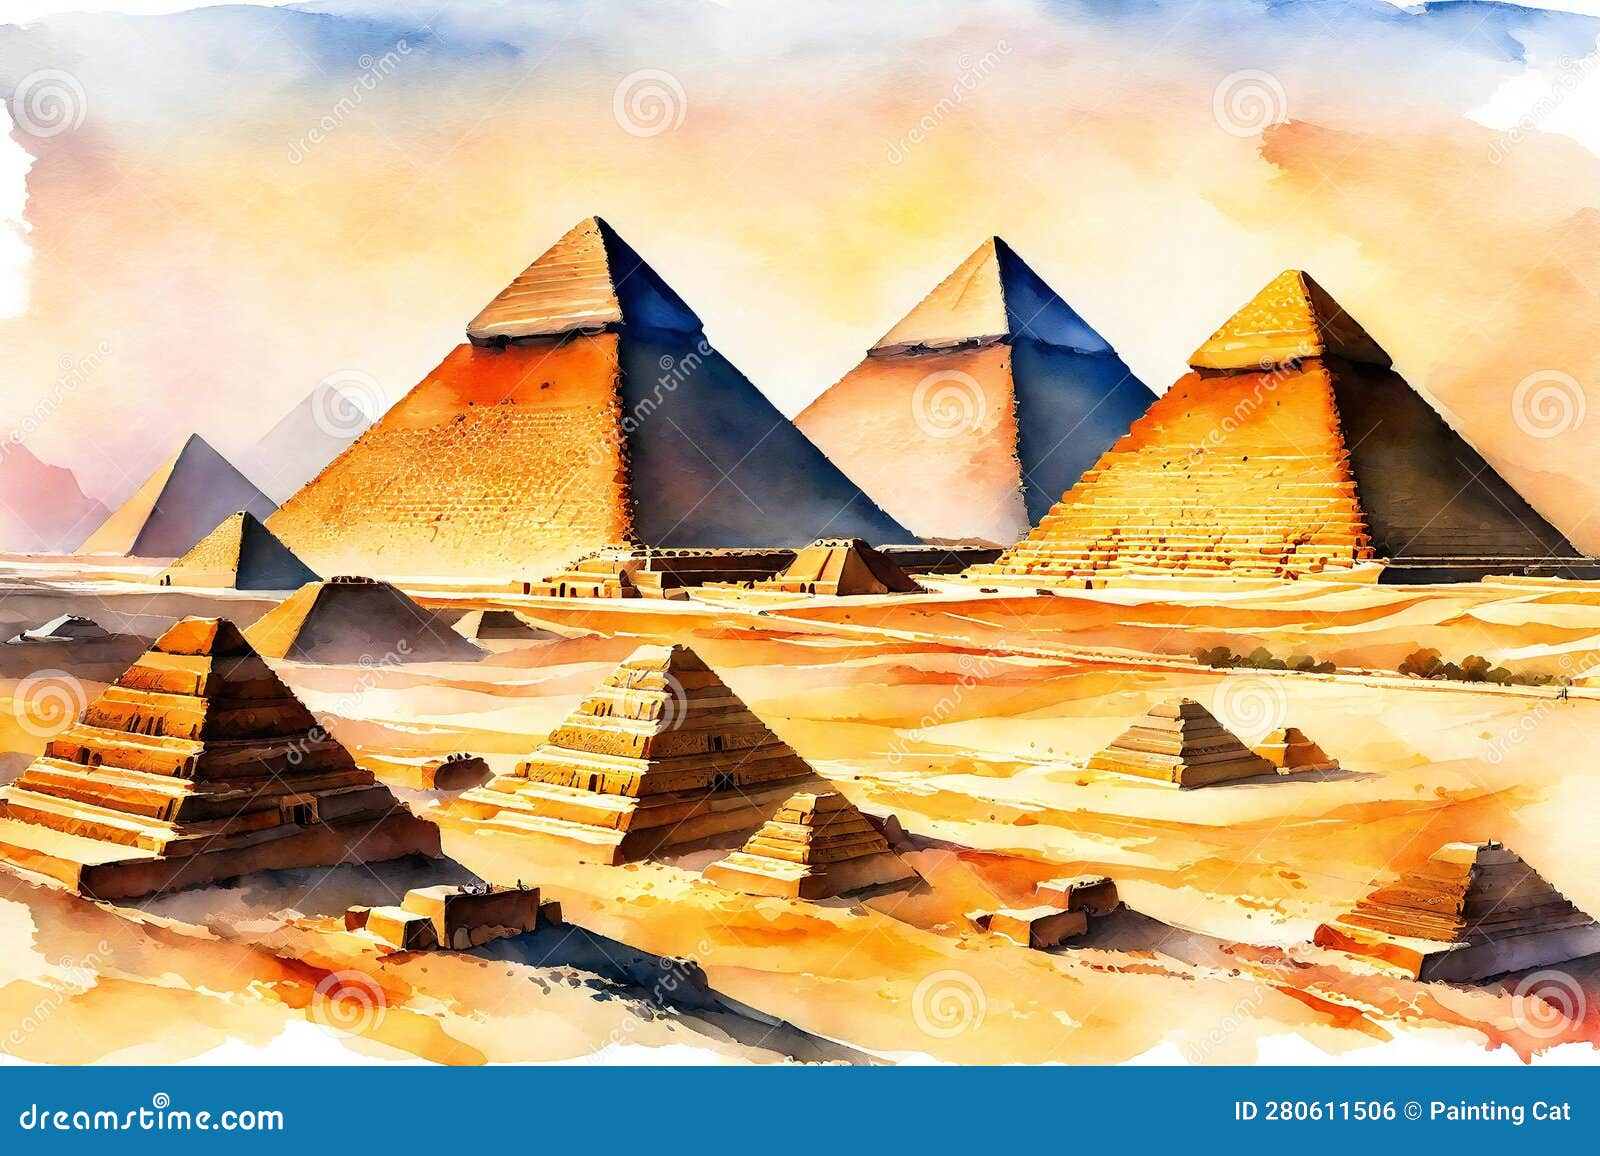 Drawing the Great Pyramids of Egypt - Anamorphic Illusion - YouTube